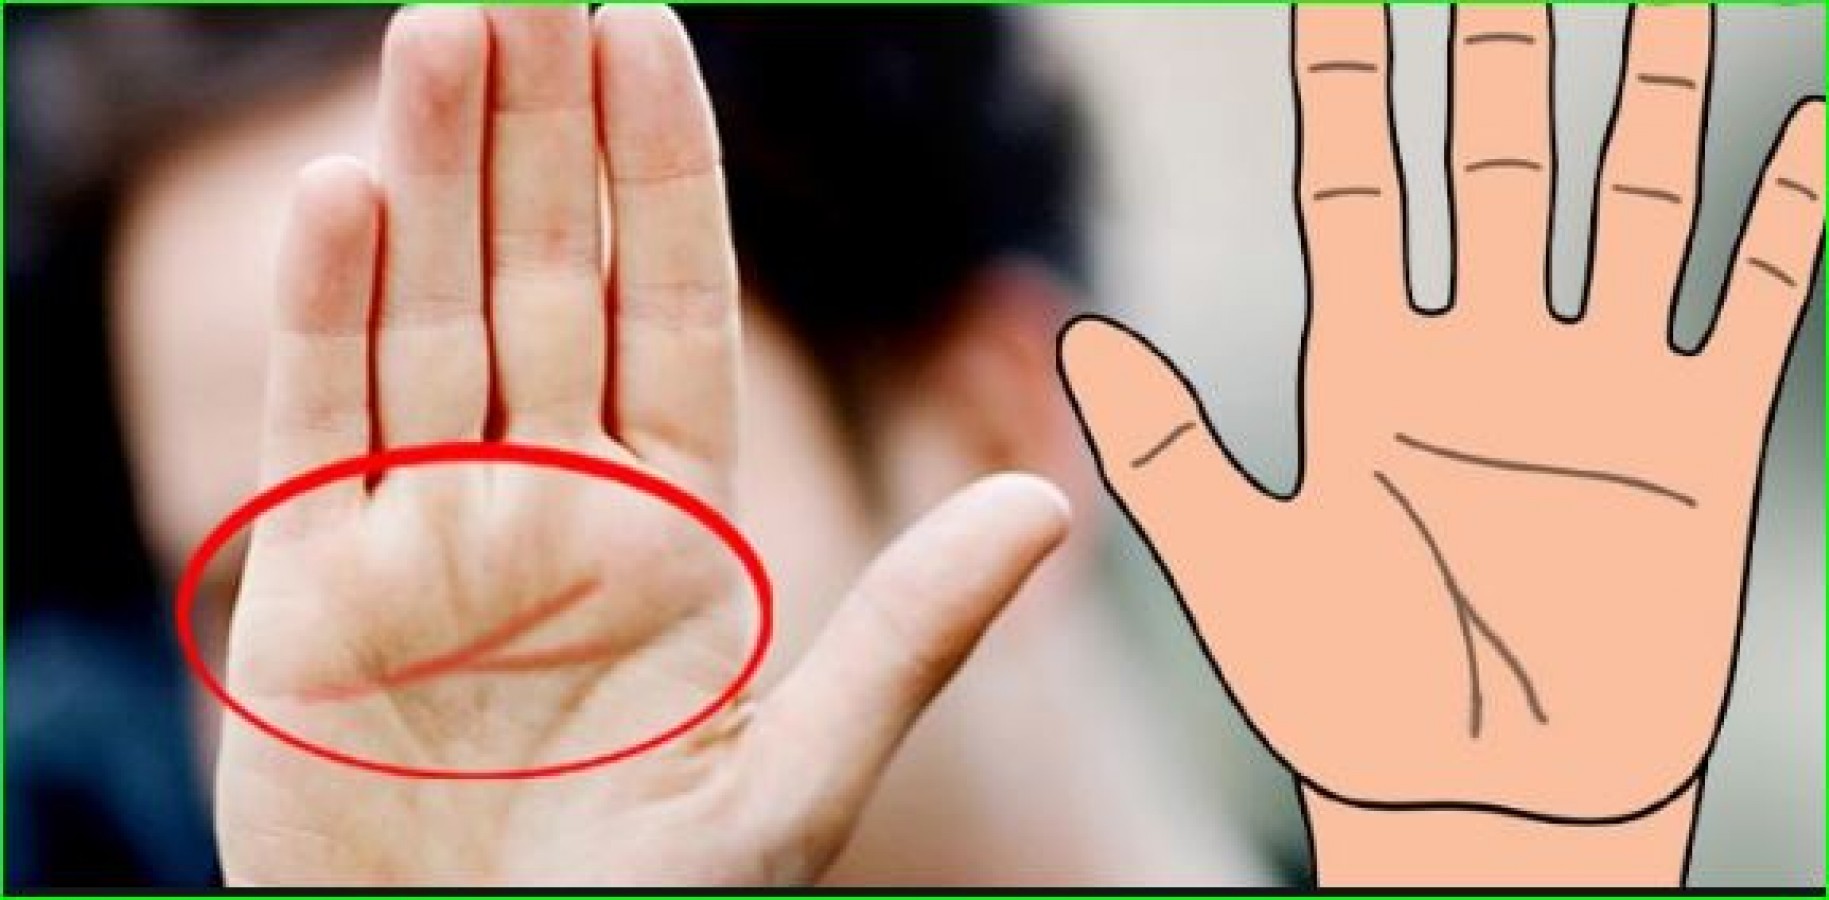 types of hands in palmistry